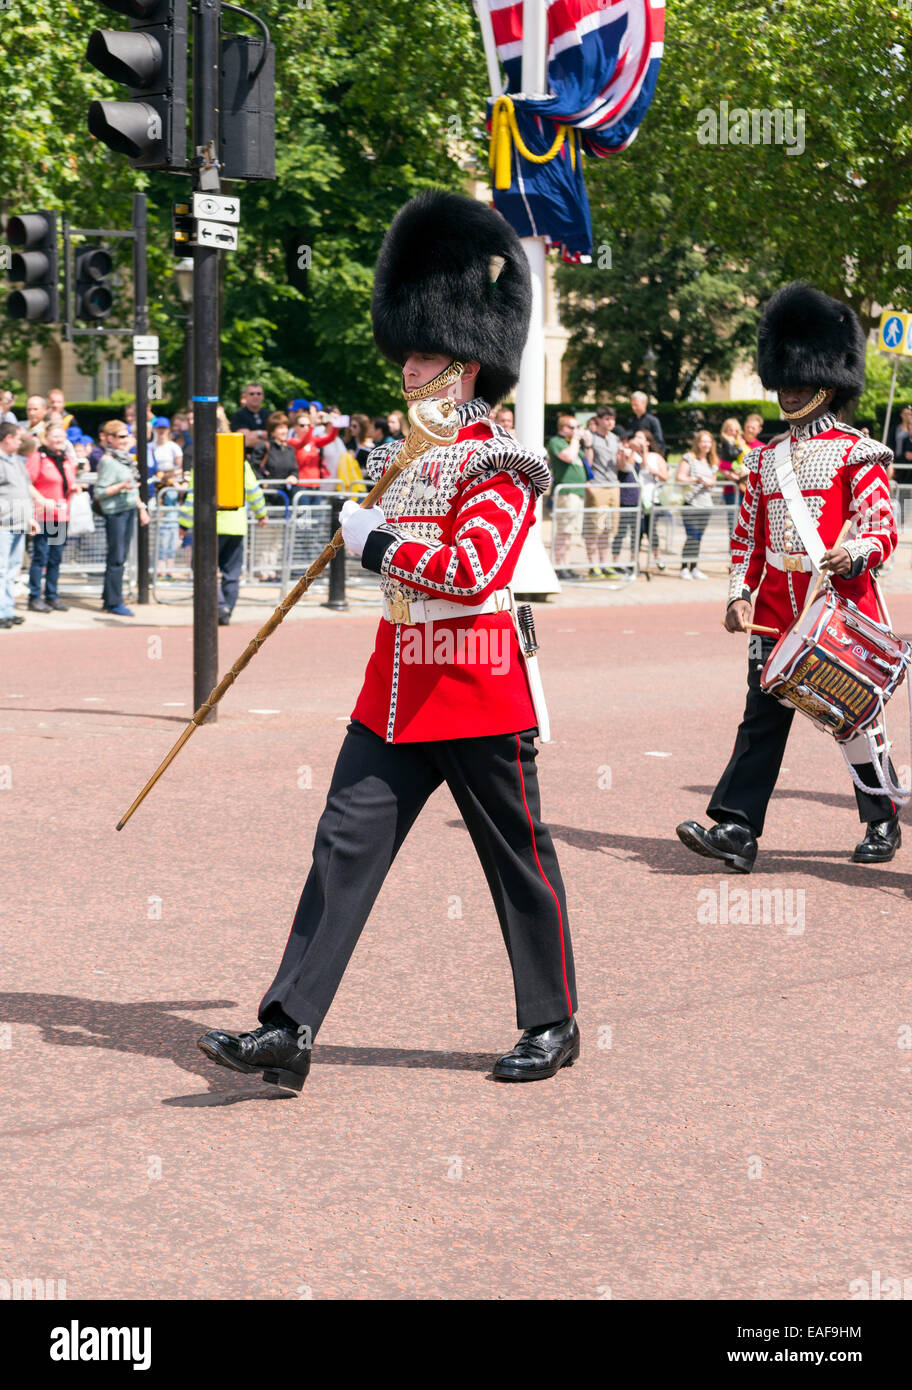 LONDON, UNITED KINGDOM - JUNE 5, 2014: British guardsmen march down the Mall in London - outside Buckingham Palace. Stock Photo